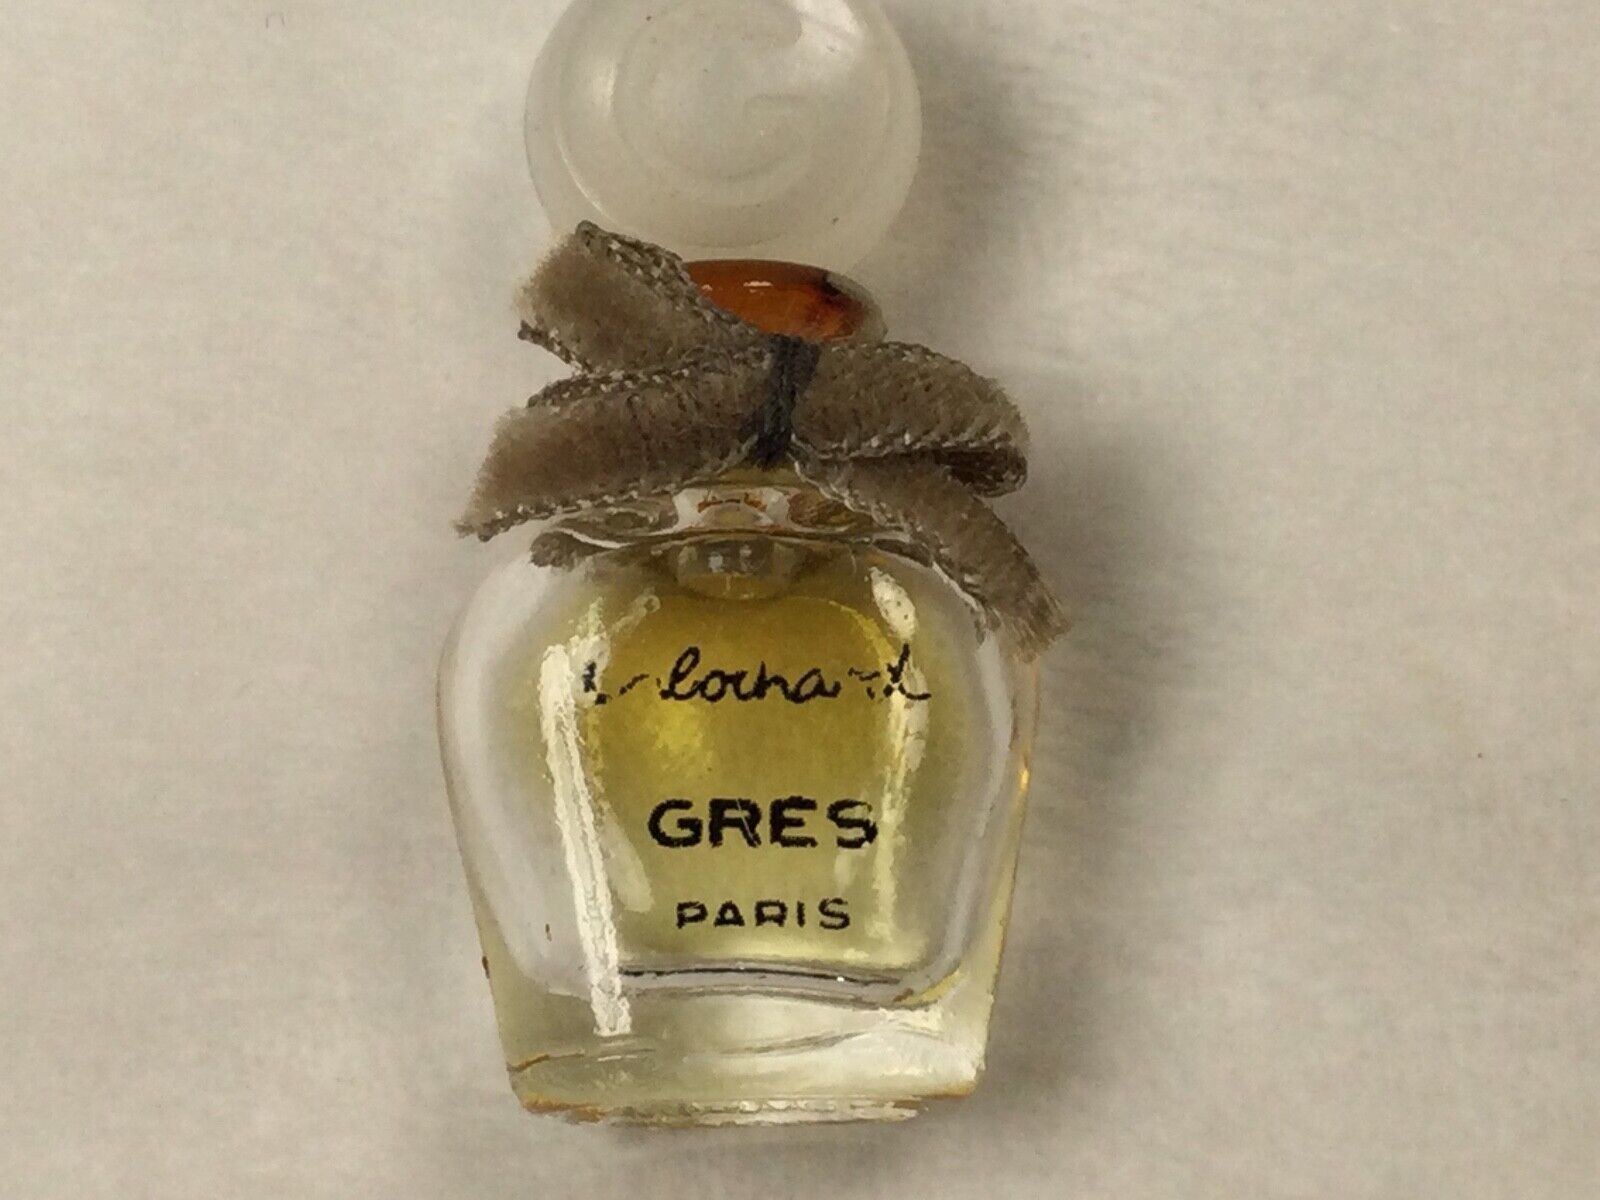 Cabochand Paris Gres Perfume France very small bottle